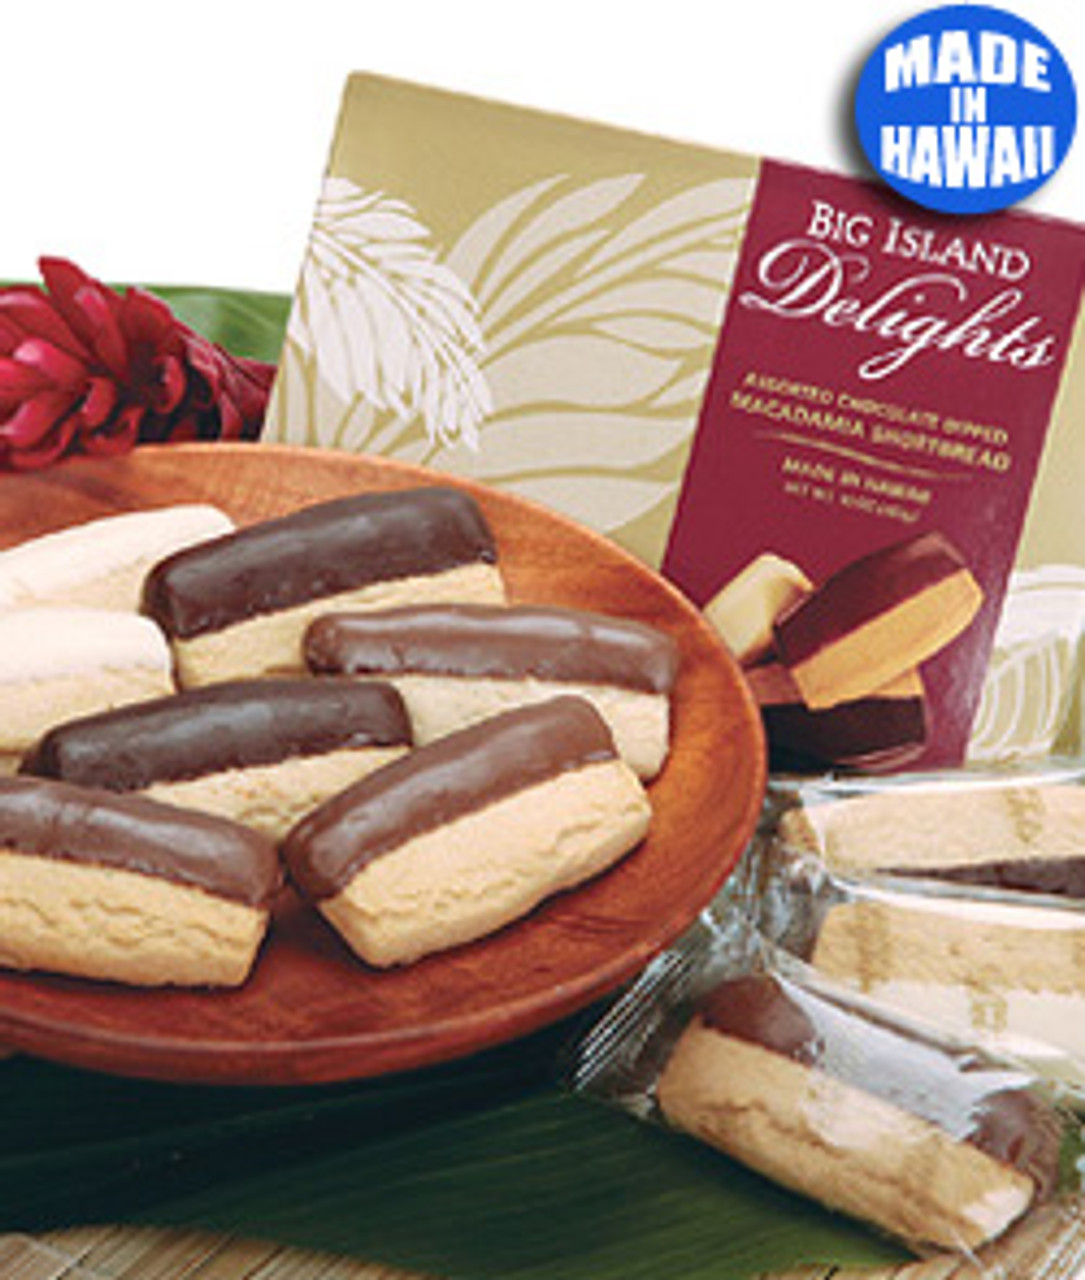 Chocolate Dipped Shortbread Cookie Assortment by Big Island Delights